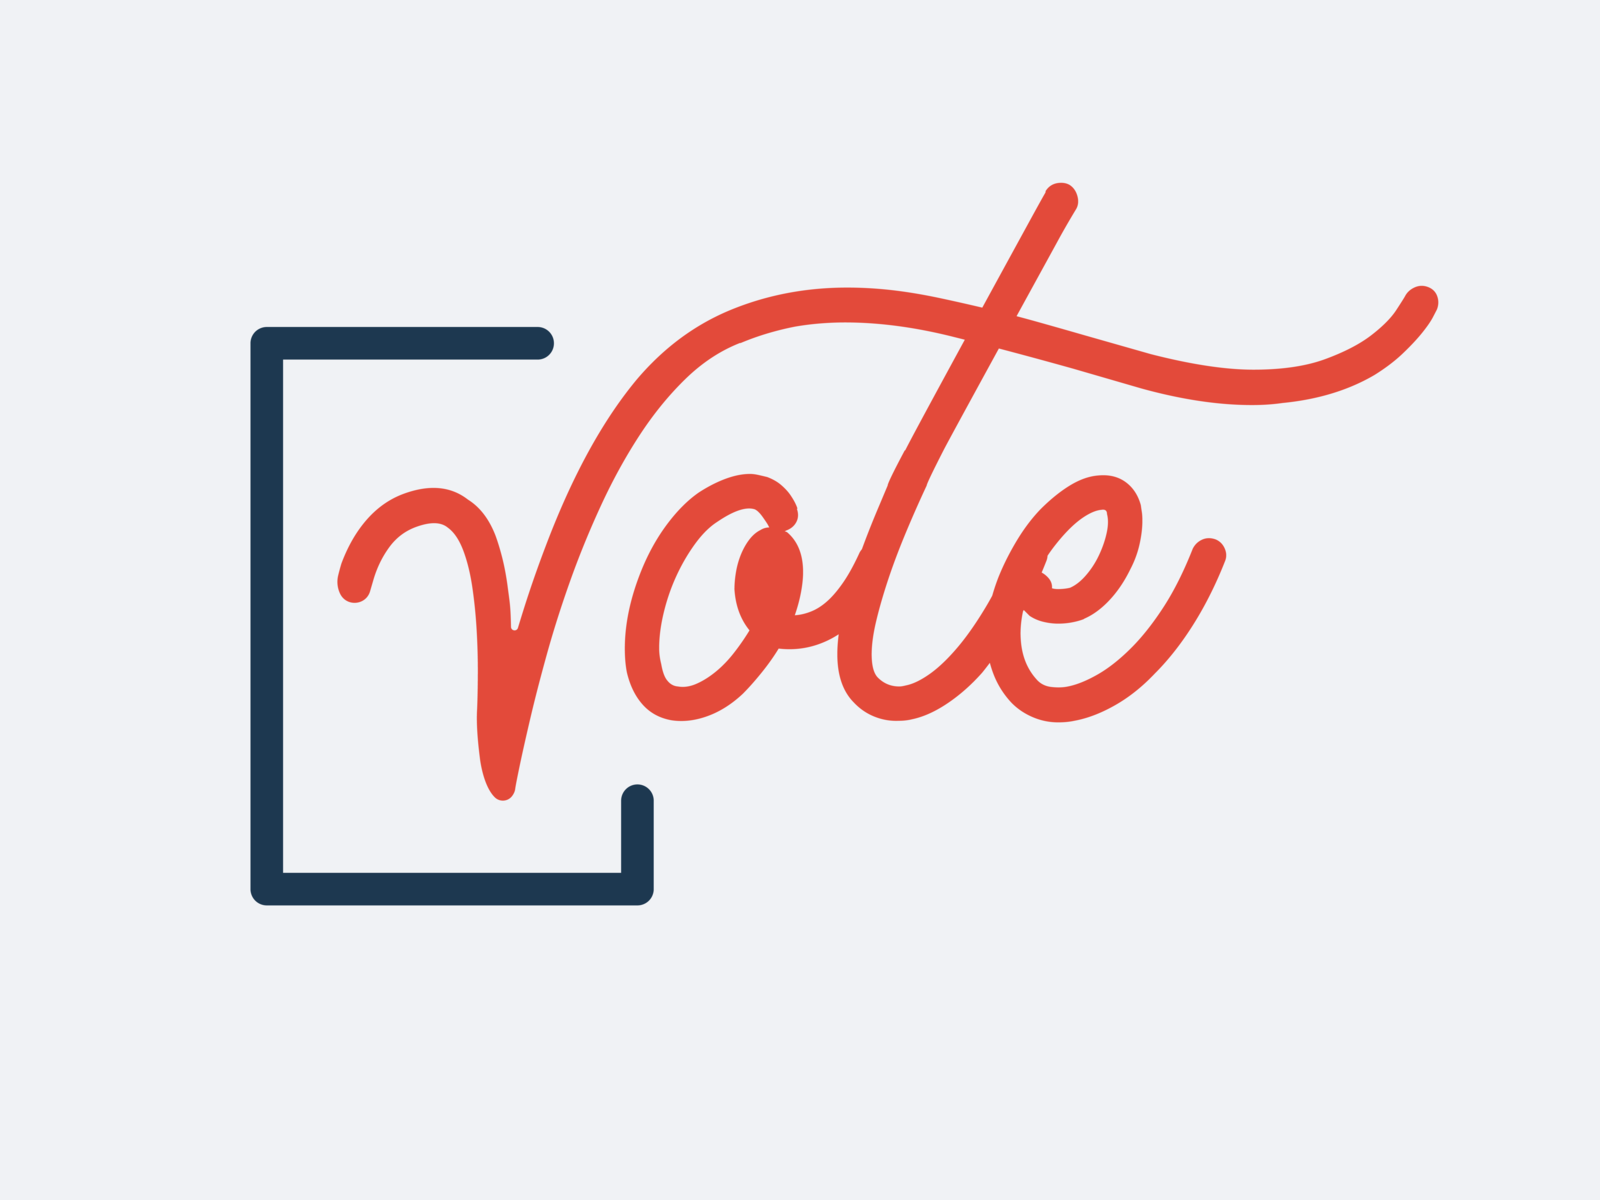 VOTE graphic by Tiffany Israel on Dribbble